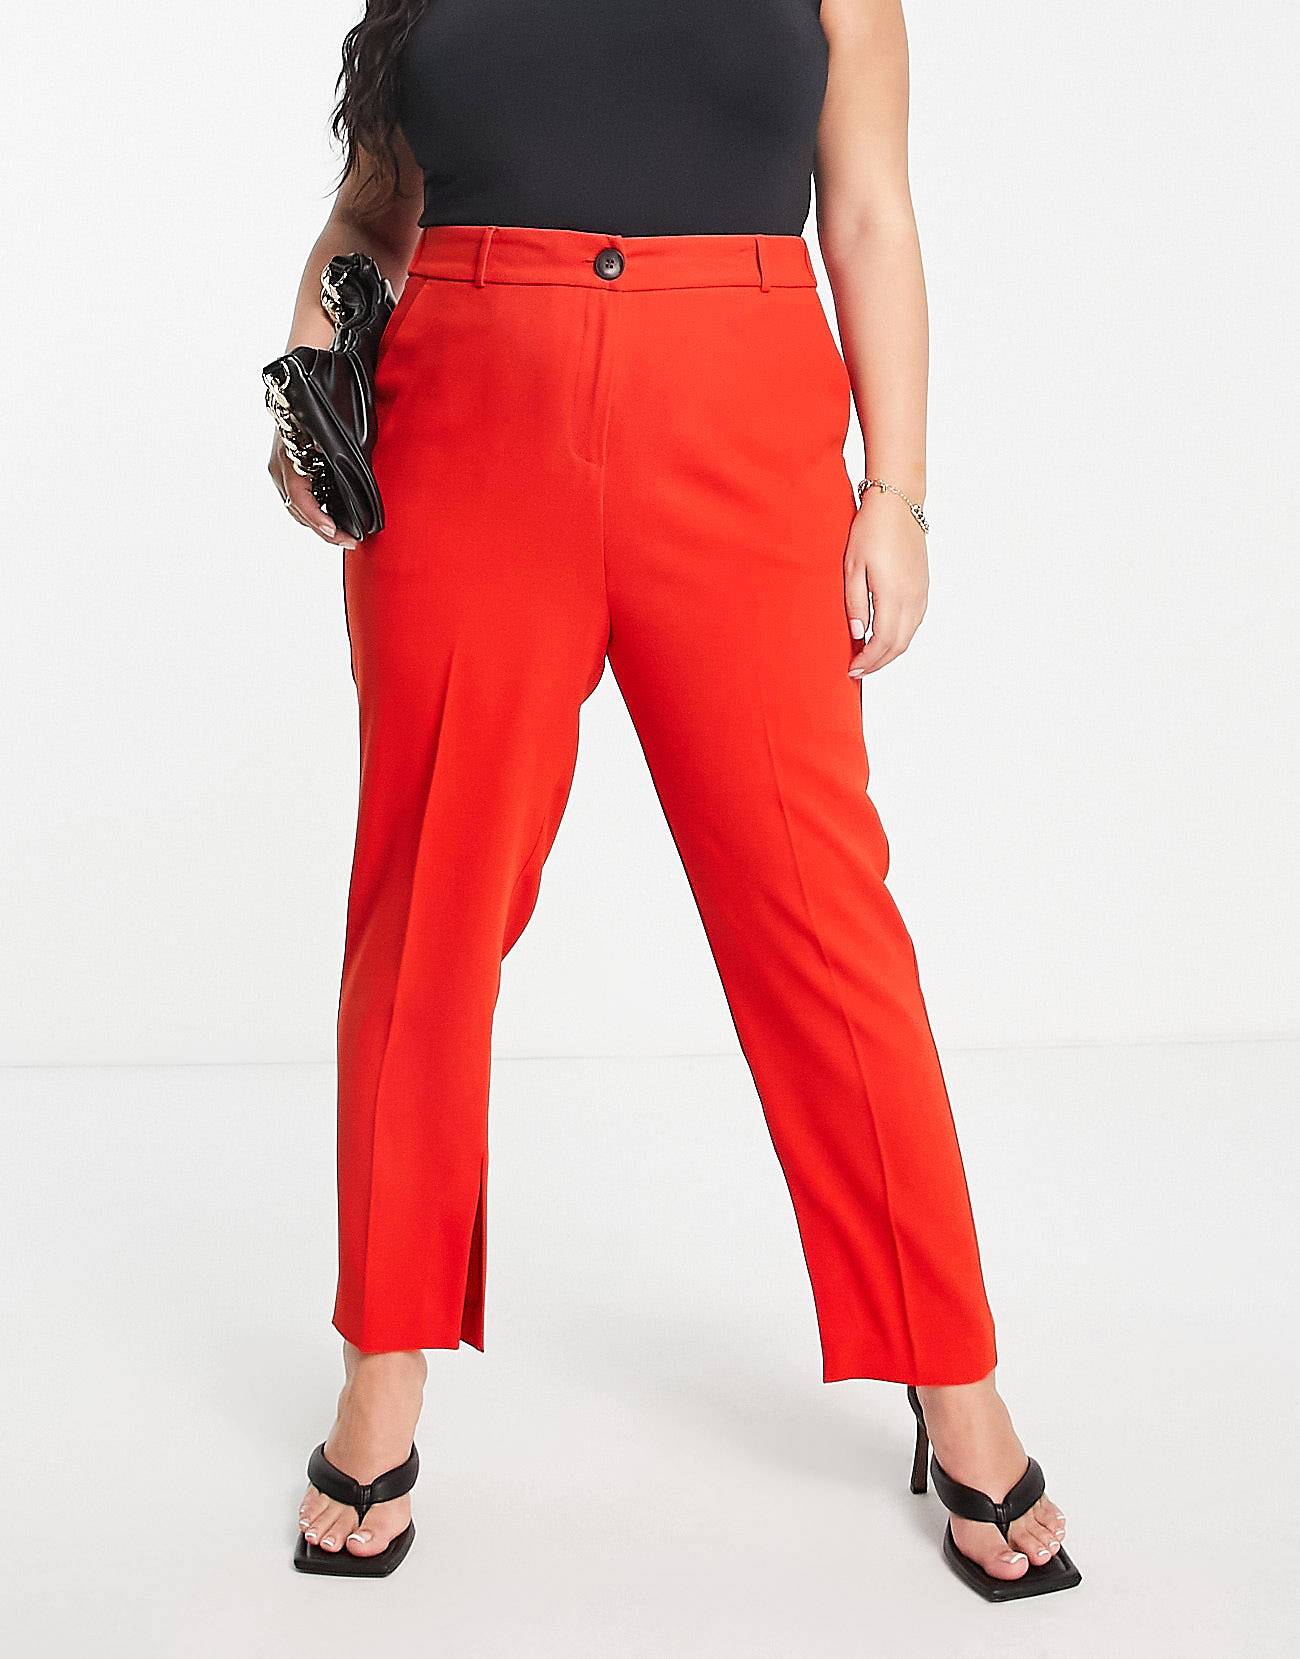 Three ways I am wearing Red Pants ⋆ chic everywhere